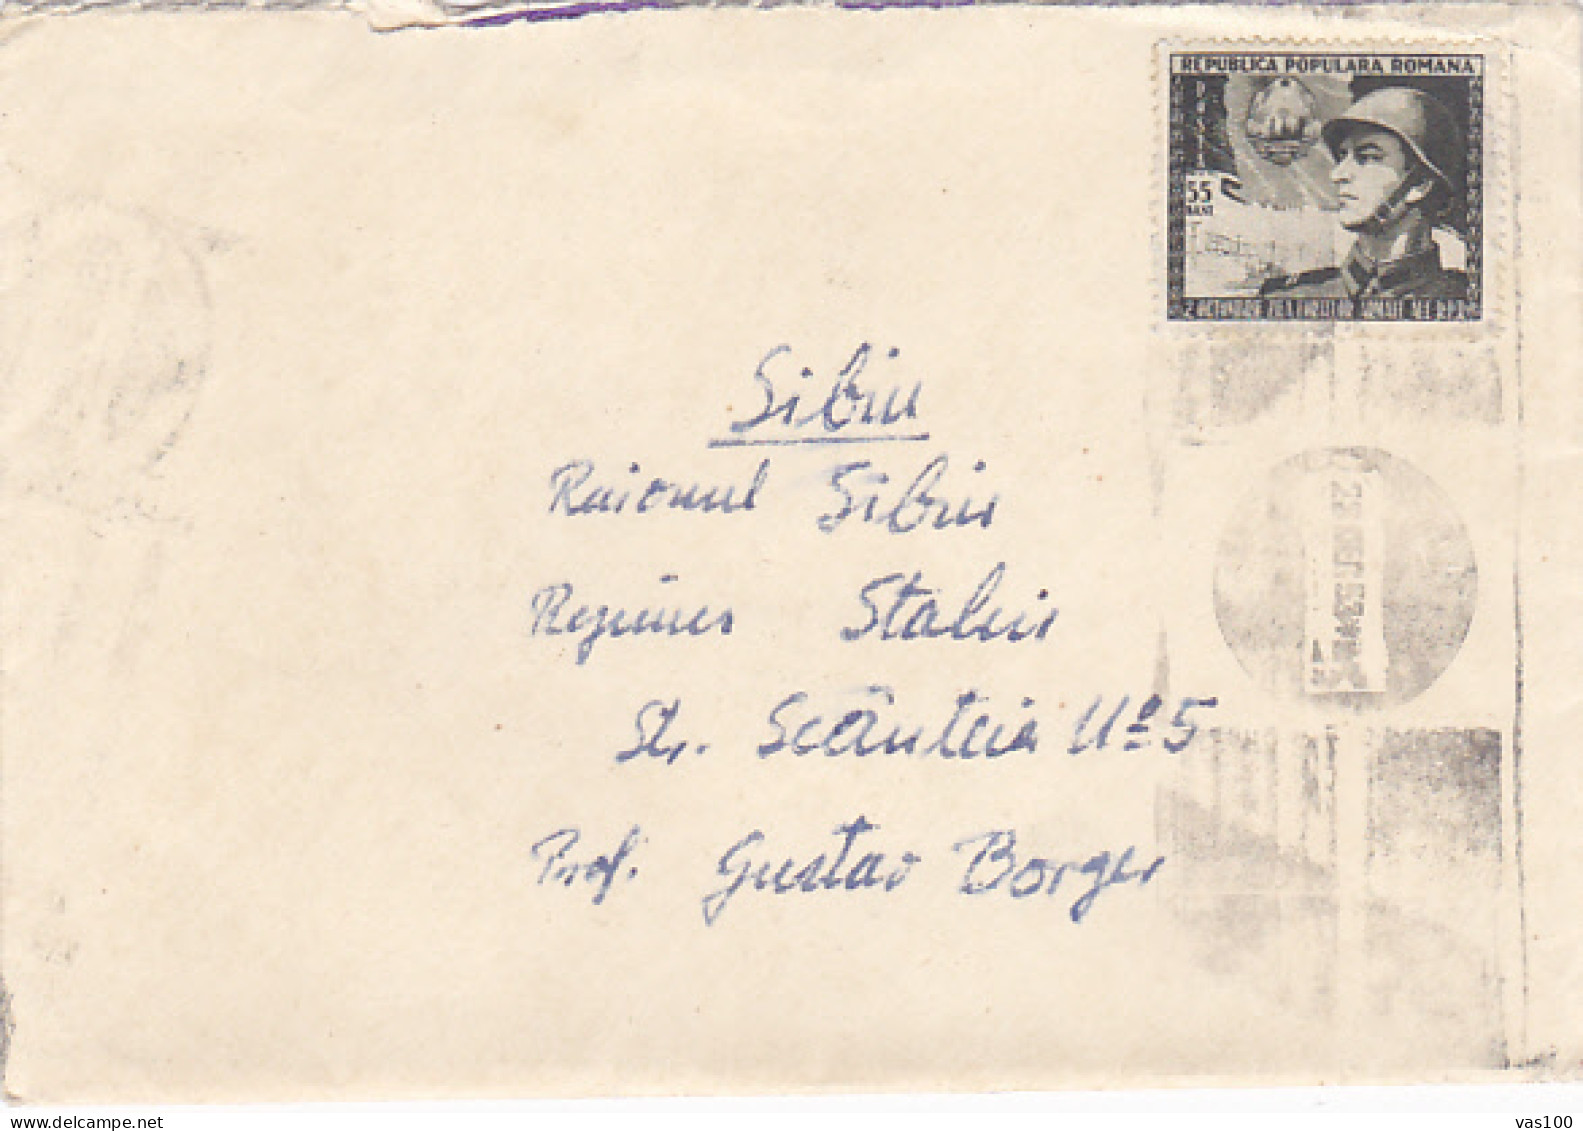 ARMY DAY, SOLDIER, STAMP ON COVER, 1953, ROMANIA - Cartas & Documentos